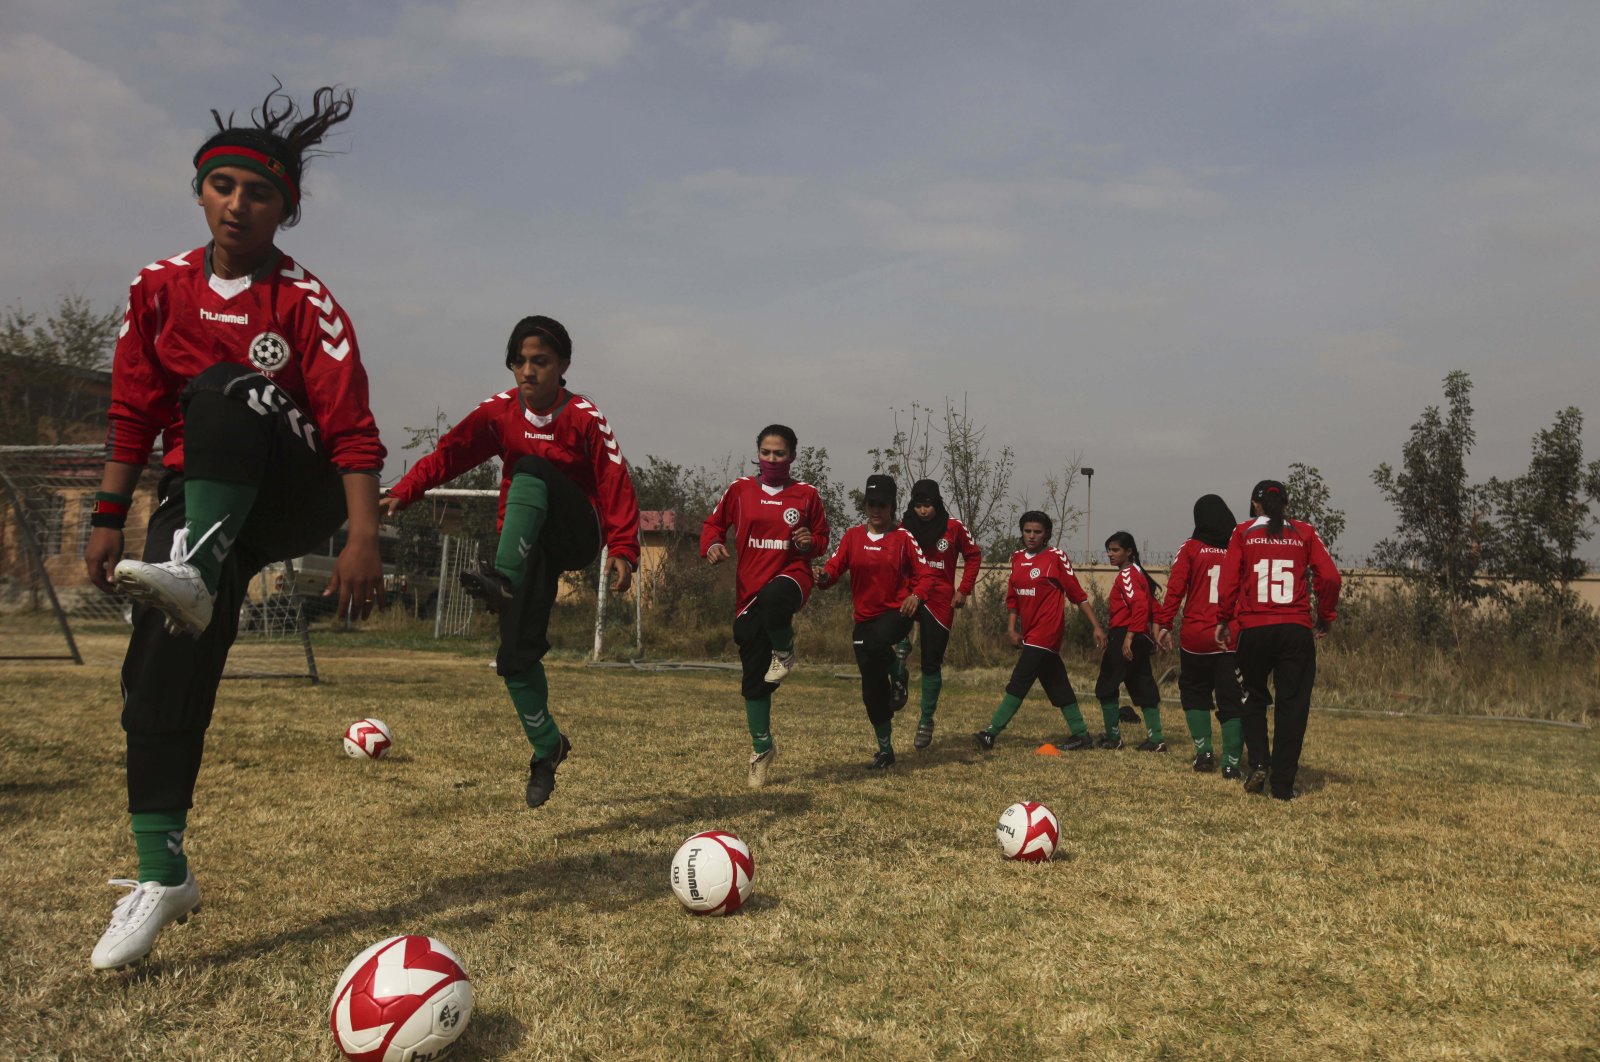 Members of the Afghan women's national football team warm up before a friendly match in Kabul, Afghanistan, Oct. 29, 2010. (AP Photo)